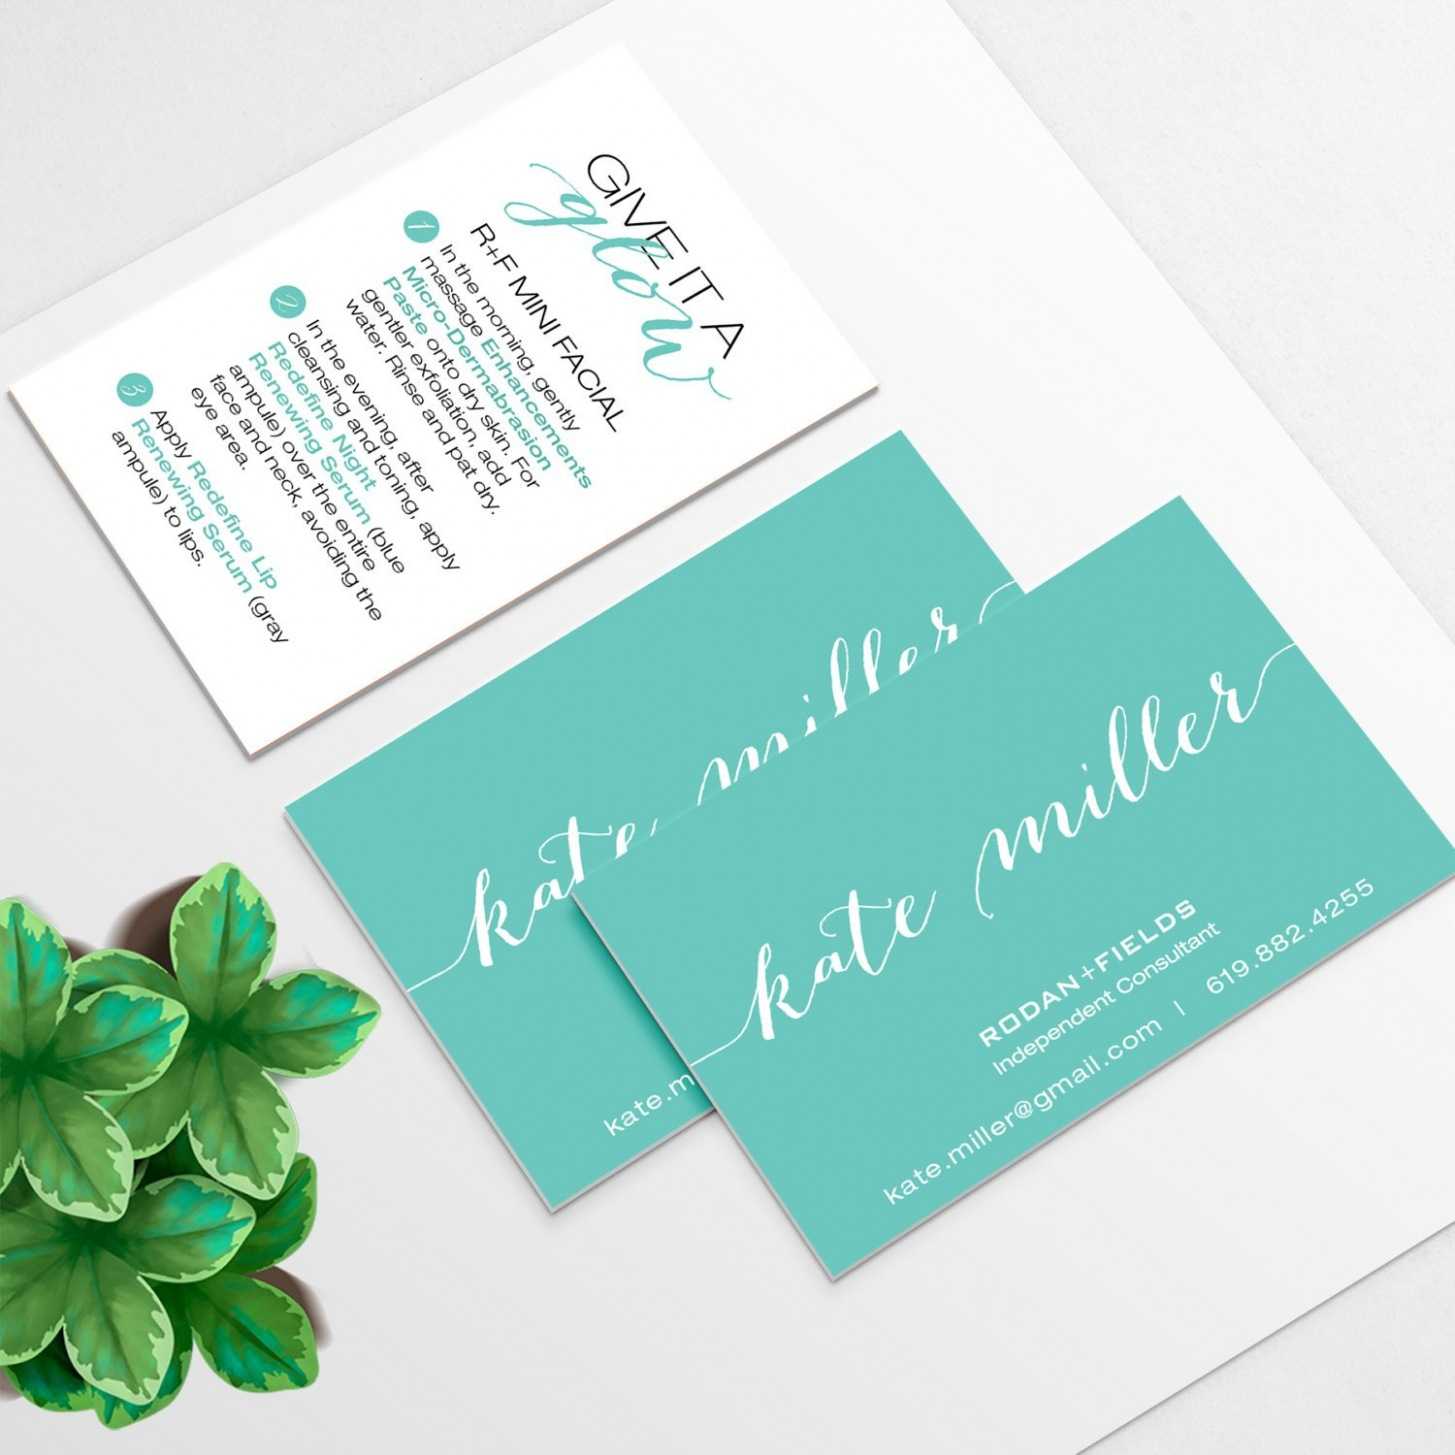 5 Moments That Basically Sum Up Your Etsy Rodan And Fields In Rodan And Fields Business Card Template